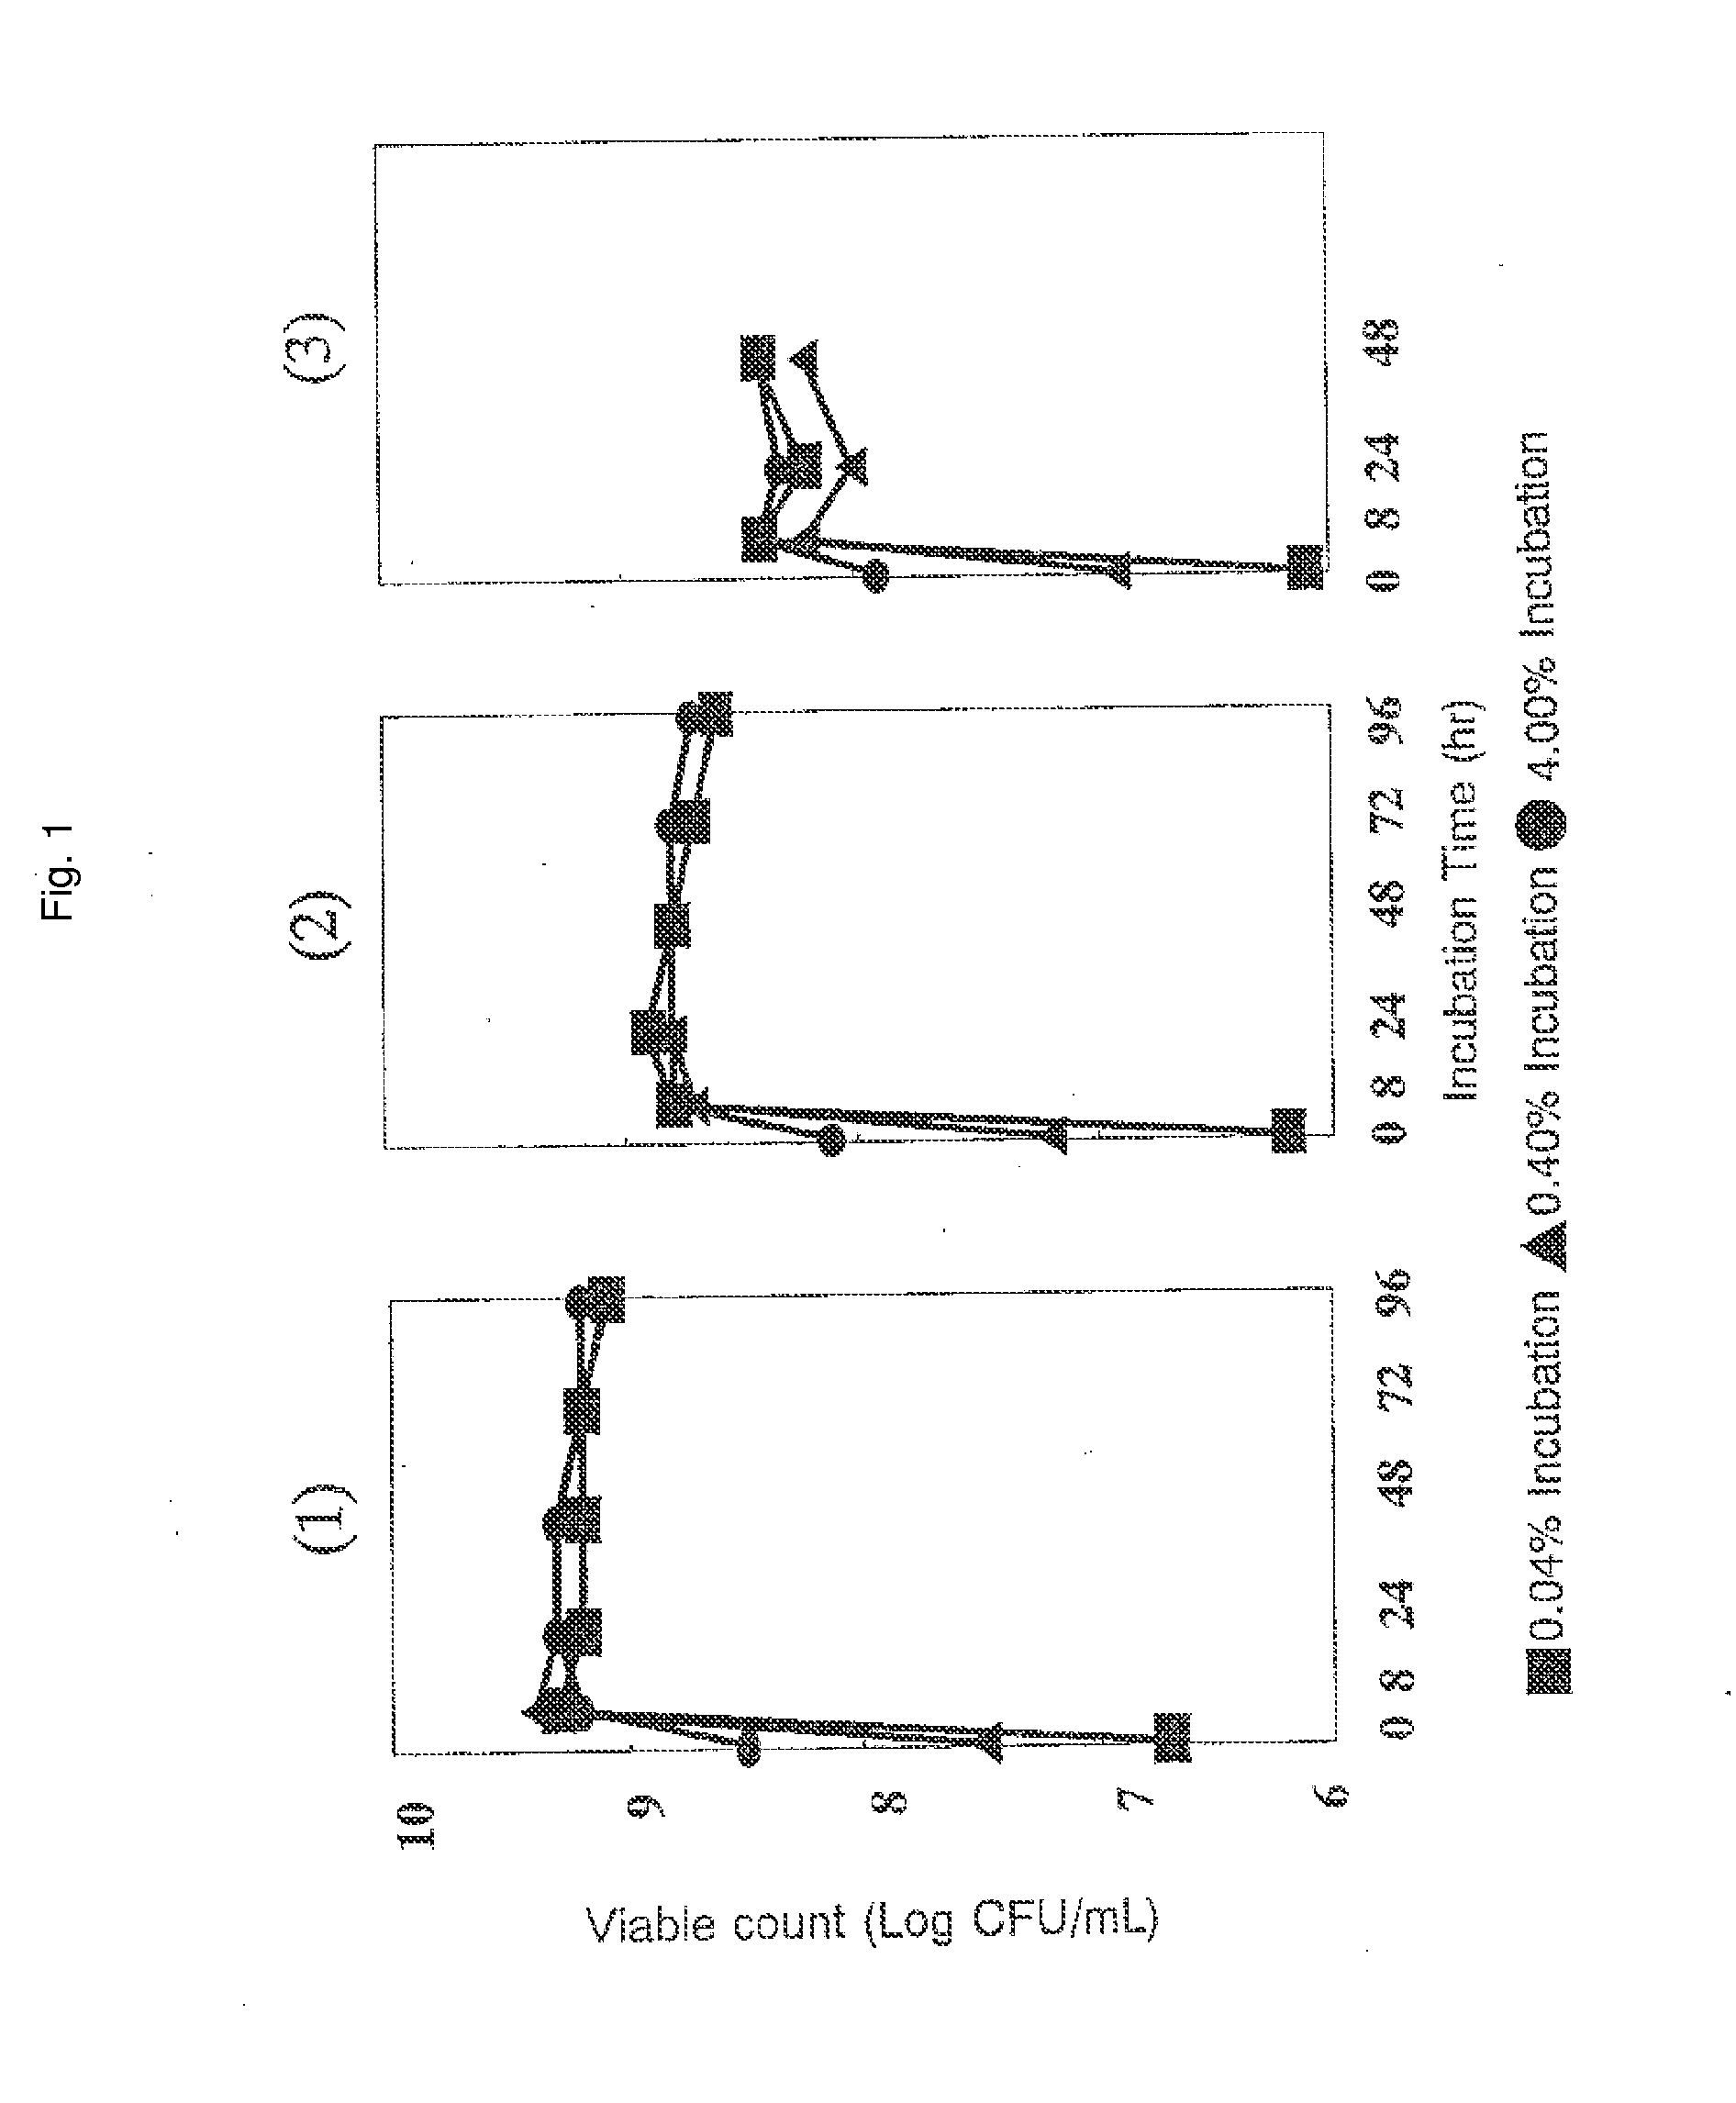 Equol-producing lactic acid bacteria-containing composition